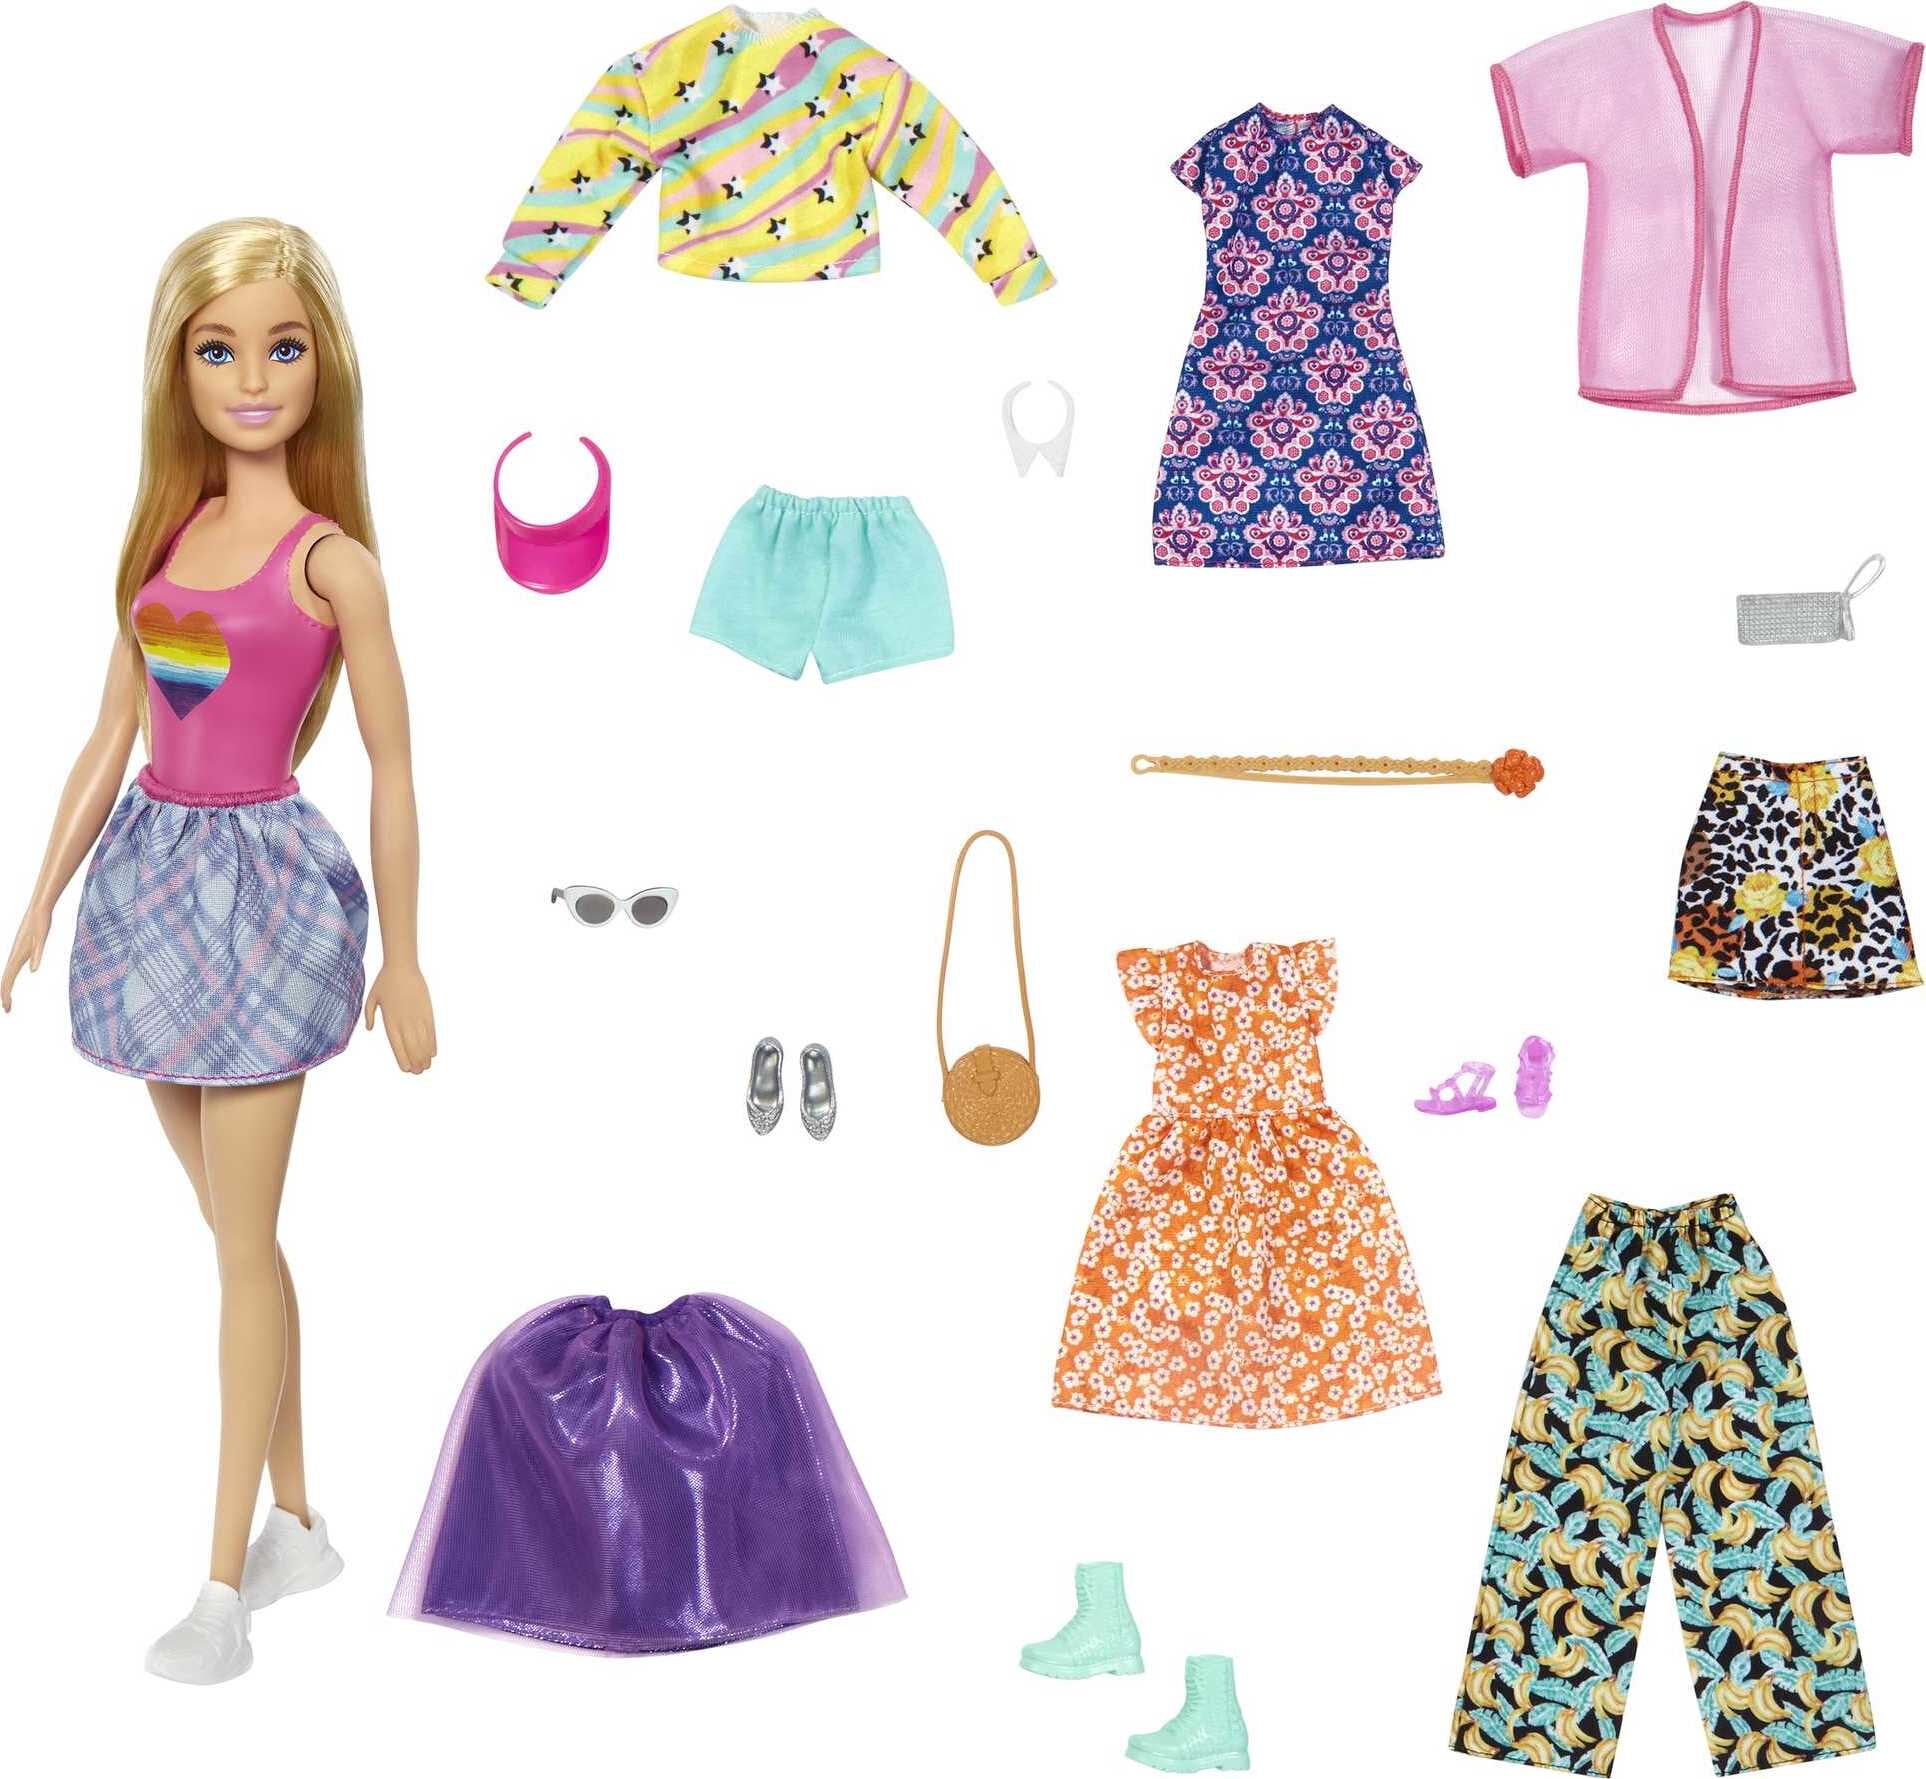 Barbie Complete Looks Clothes Western-style Fashion Pack with Accessories